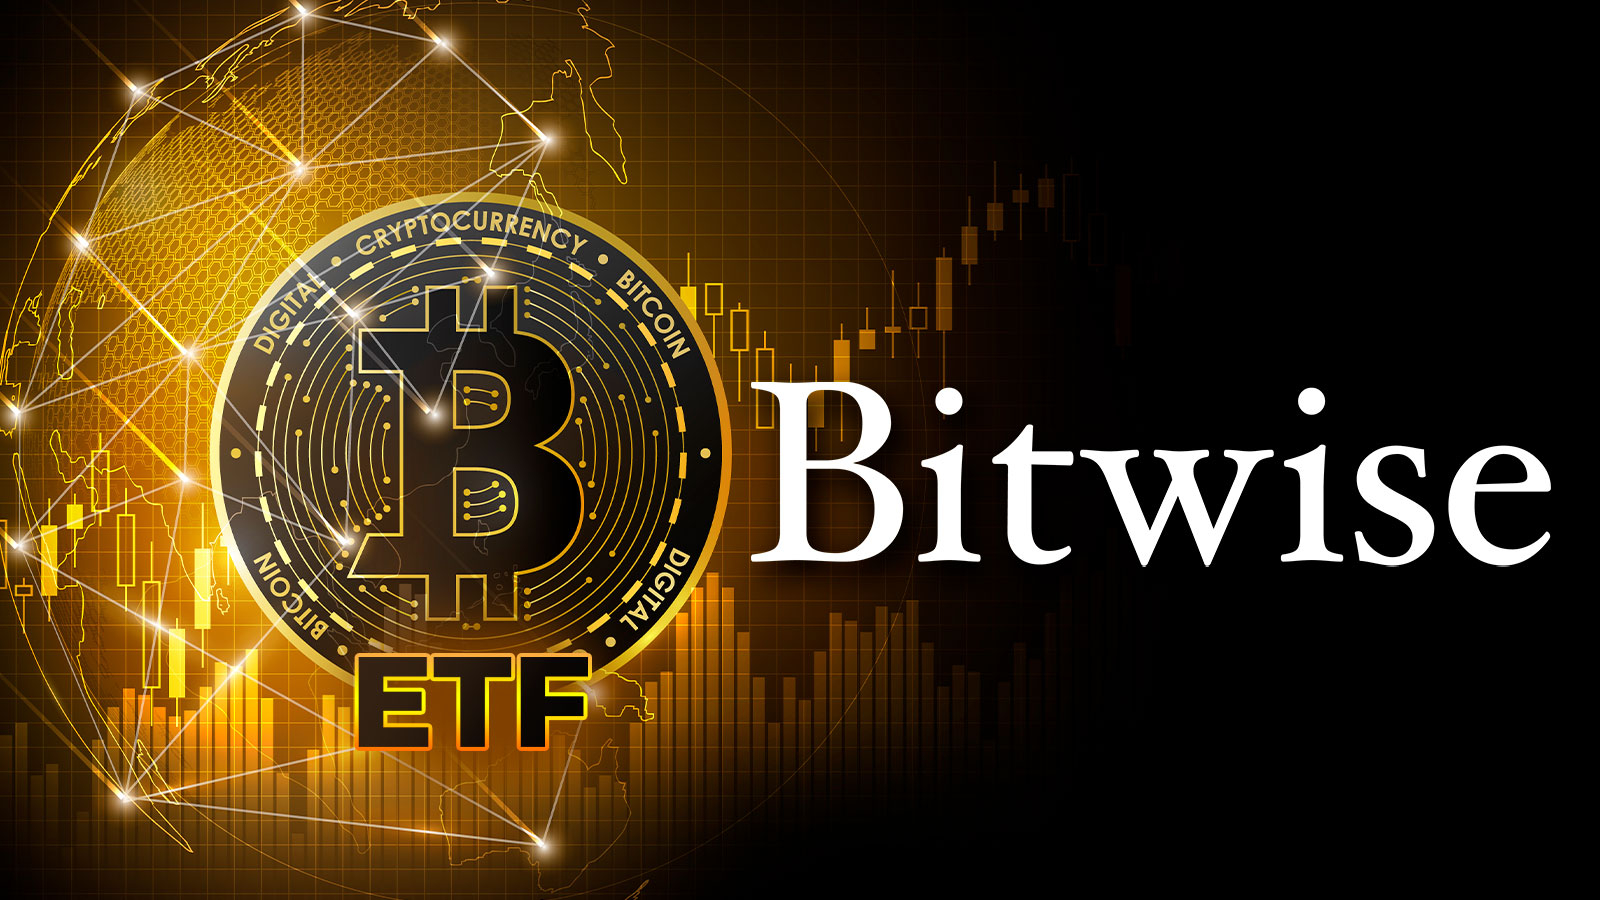 Revised Bitcoin ETF Proposal Submitted by Bitwise